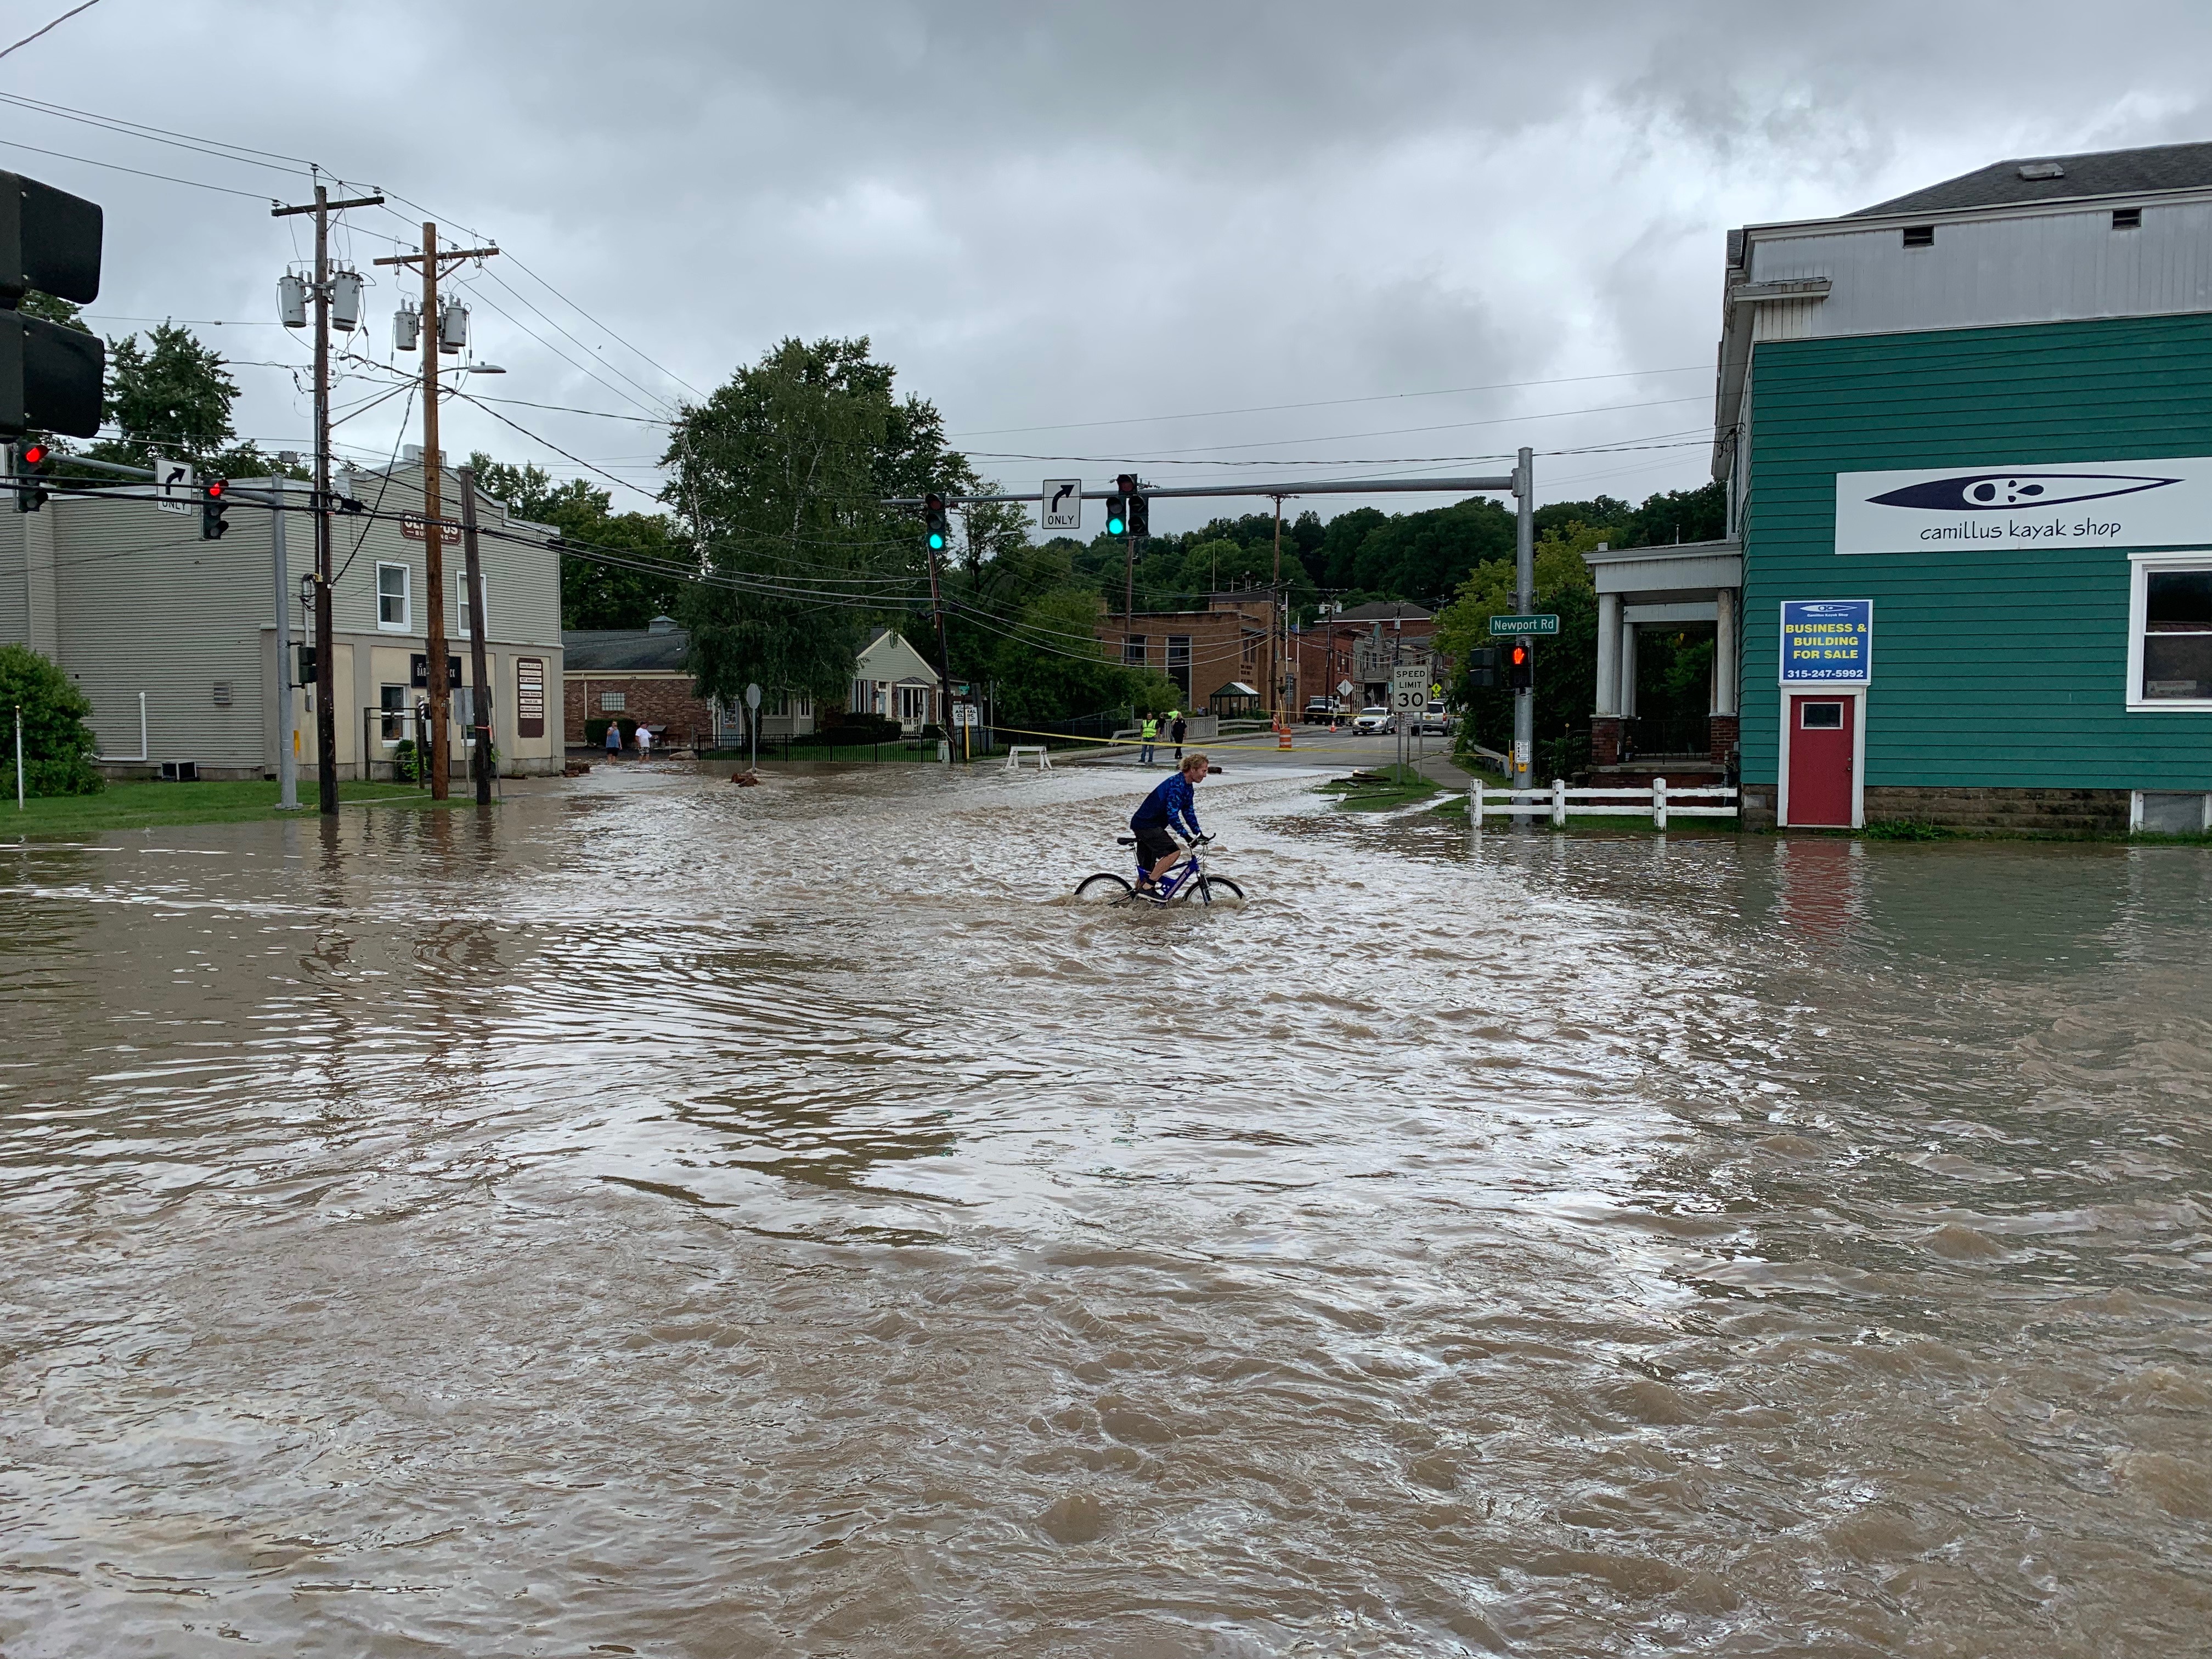 A person rides a bike through flood waters at Newport and South streets in Camillus on Thursday, Aug. 19, 2021.